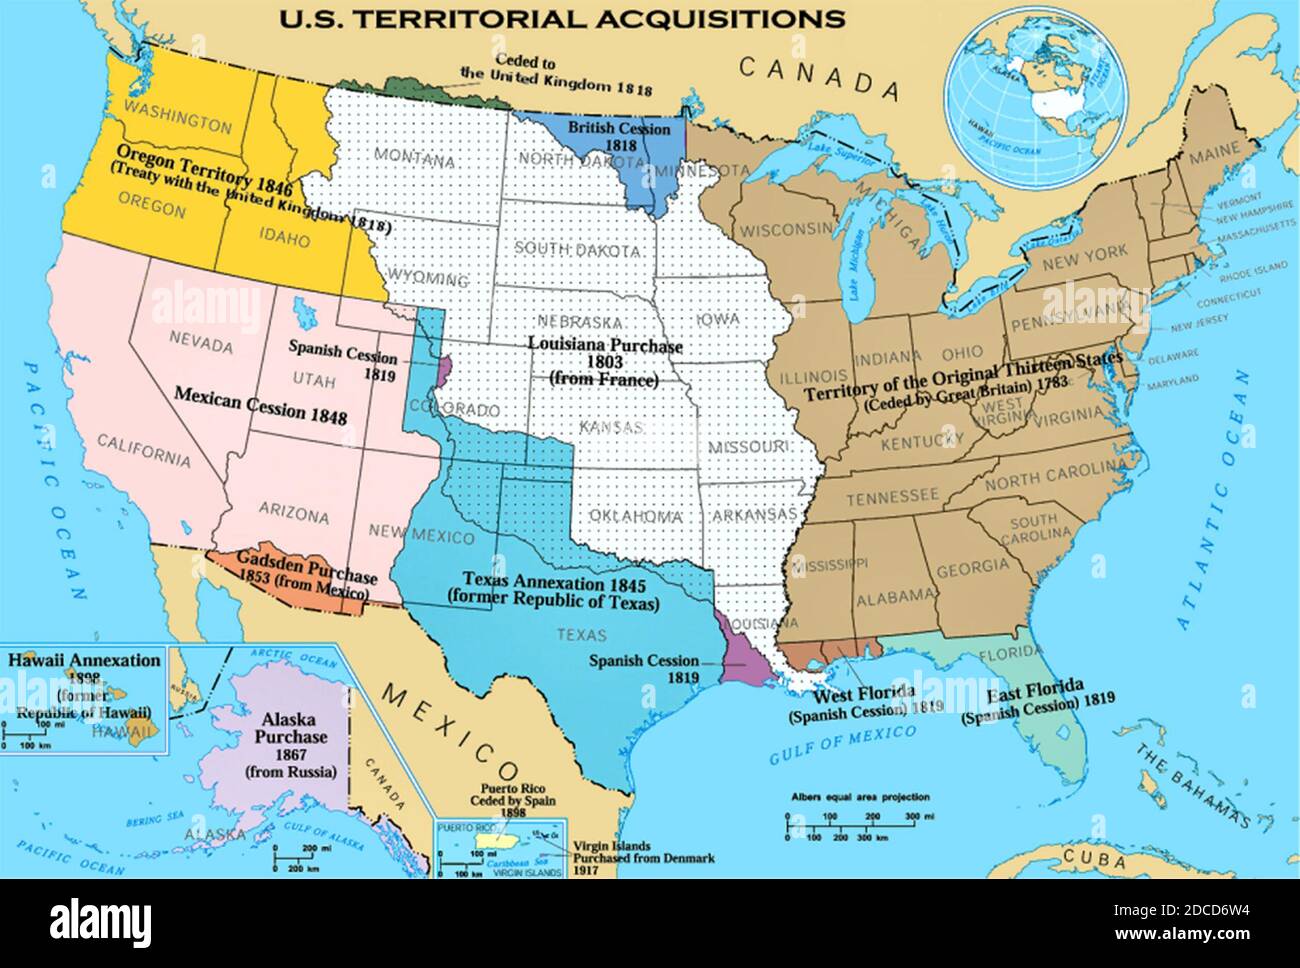 Territorial Acquisitions of United States, Map Stock Photo